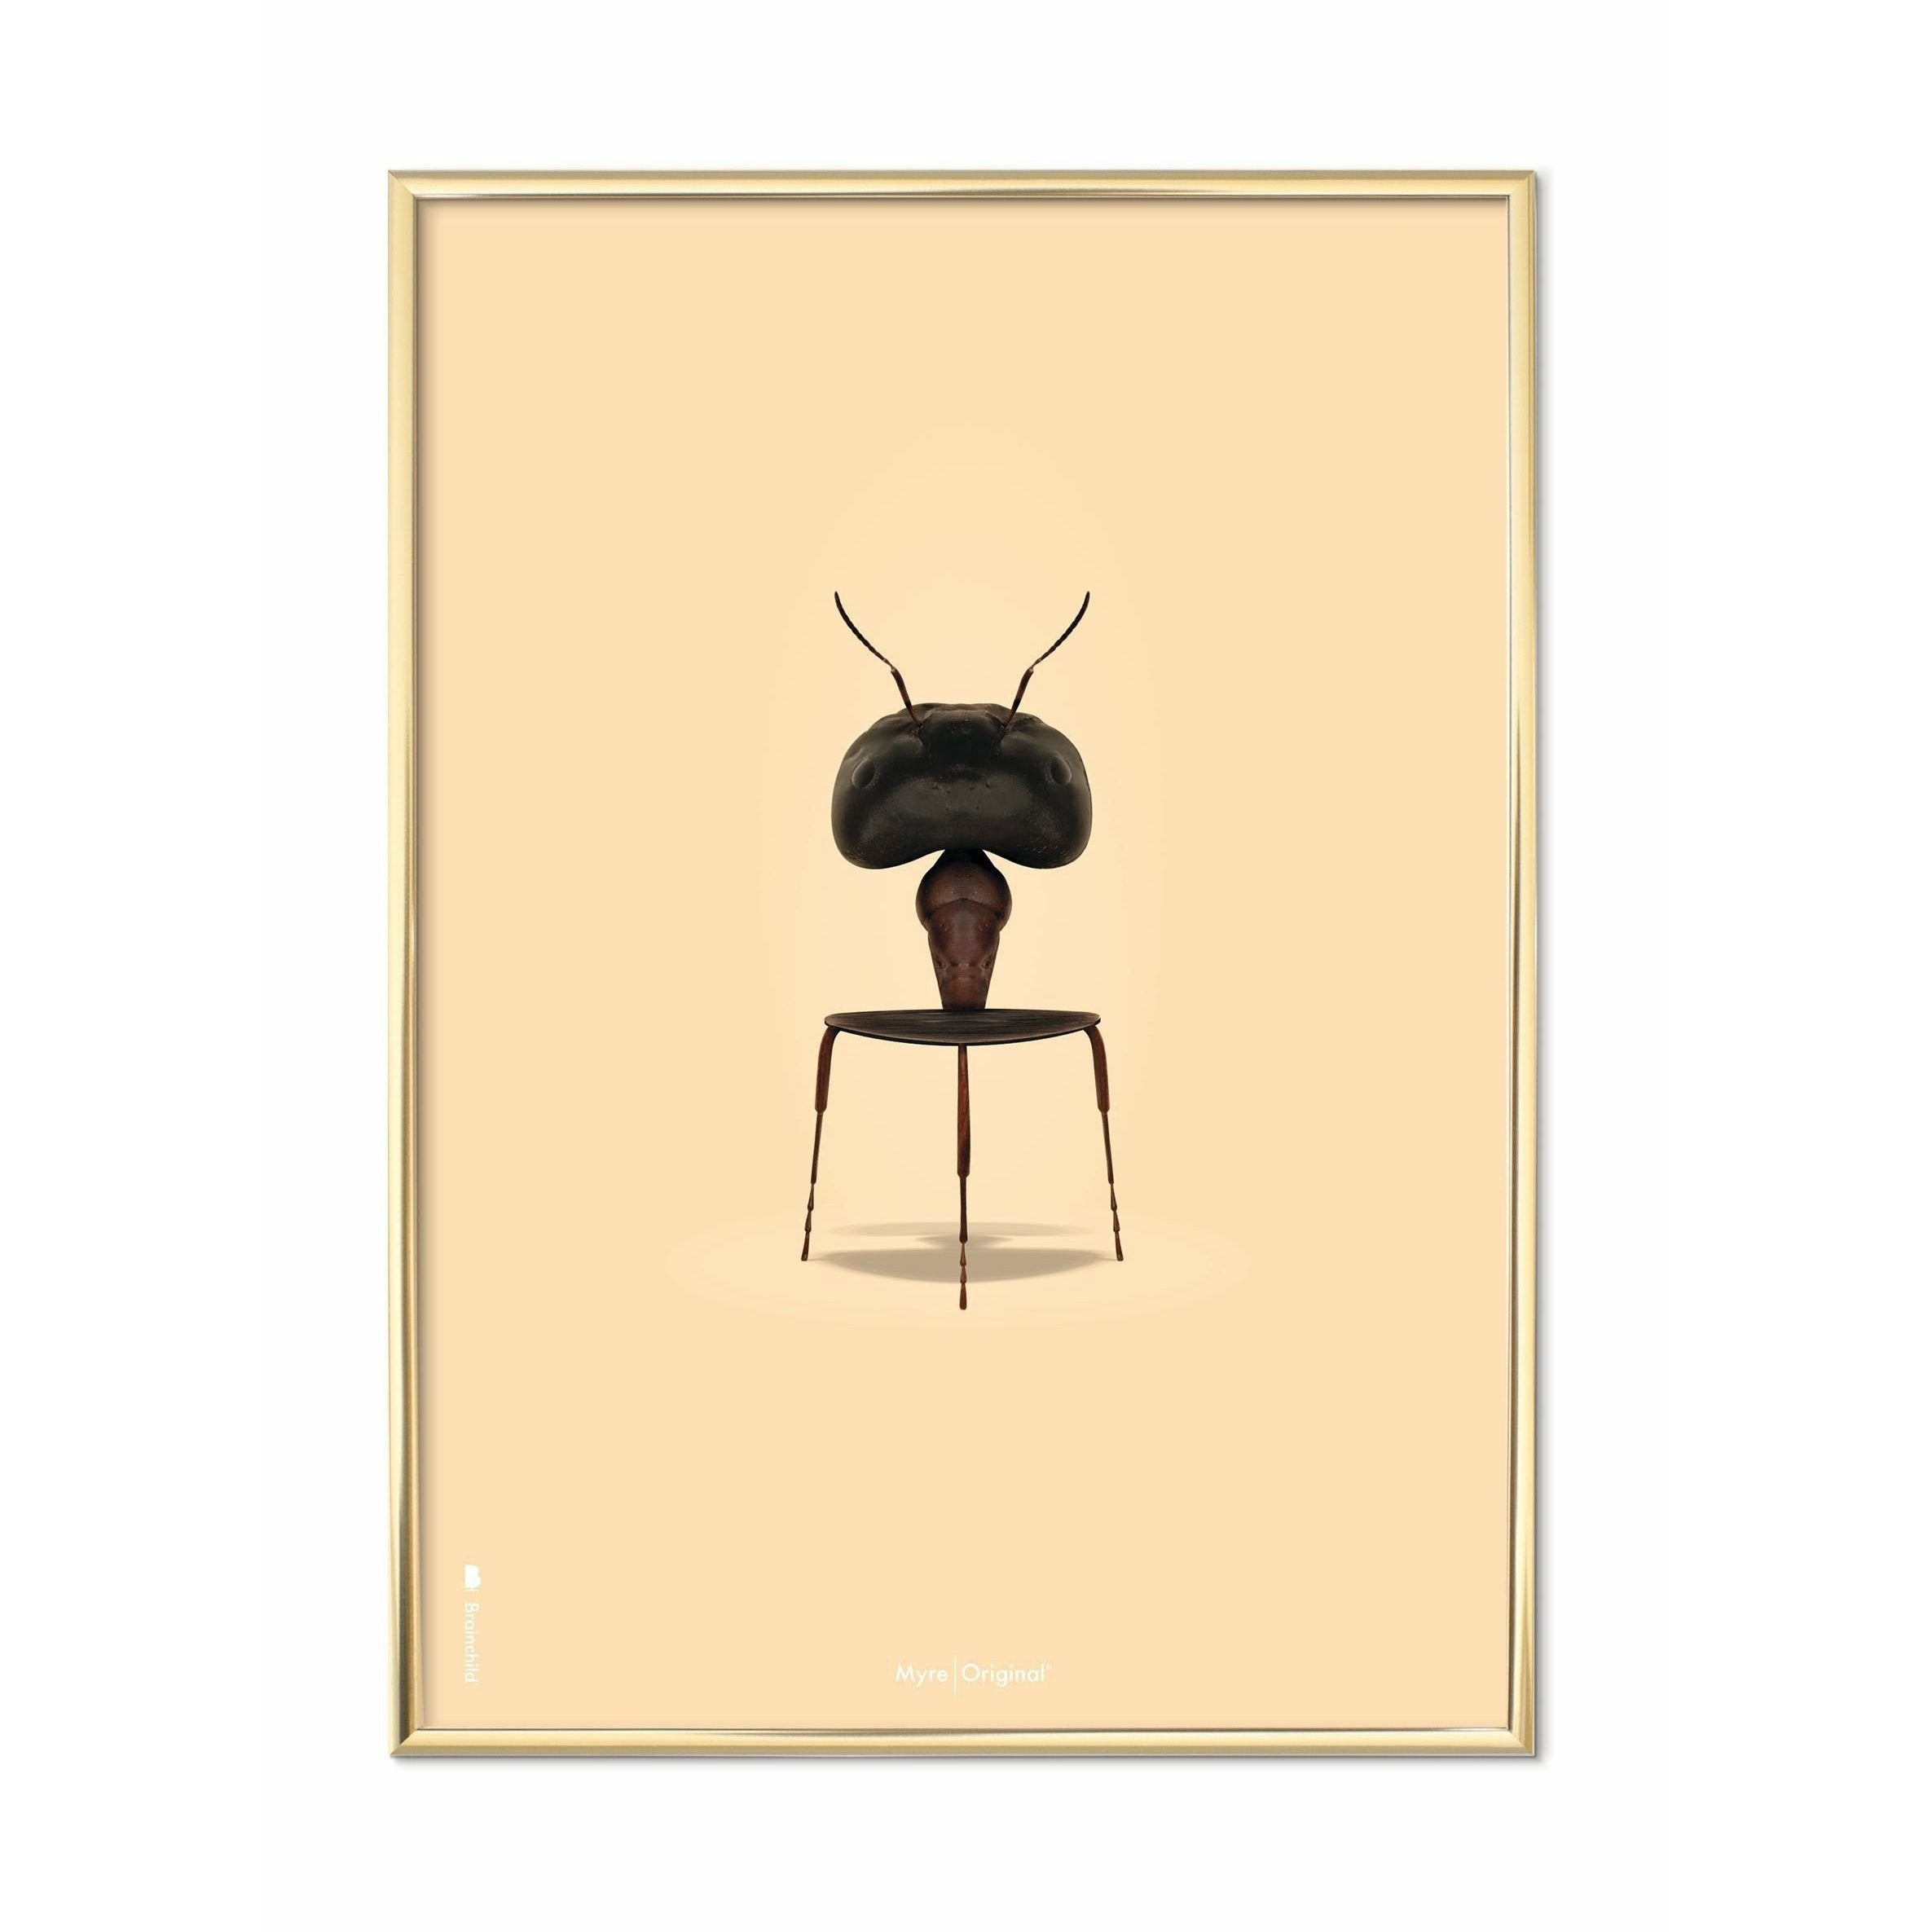 Brainchild Ant Classic Poster, Brass Frame 50x70 Cm, Sand Colored Background